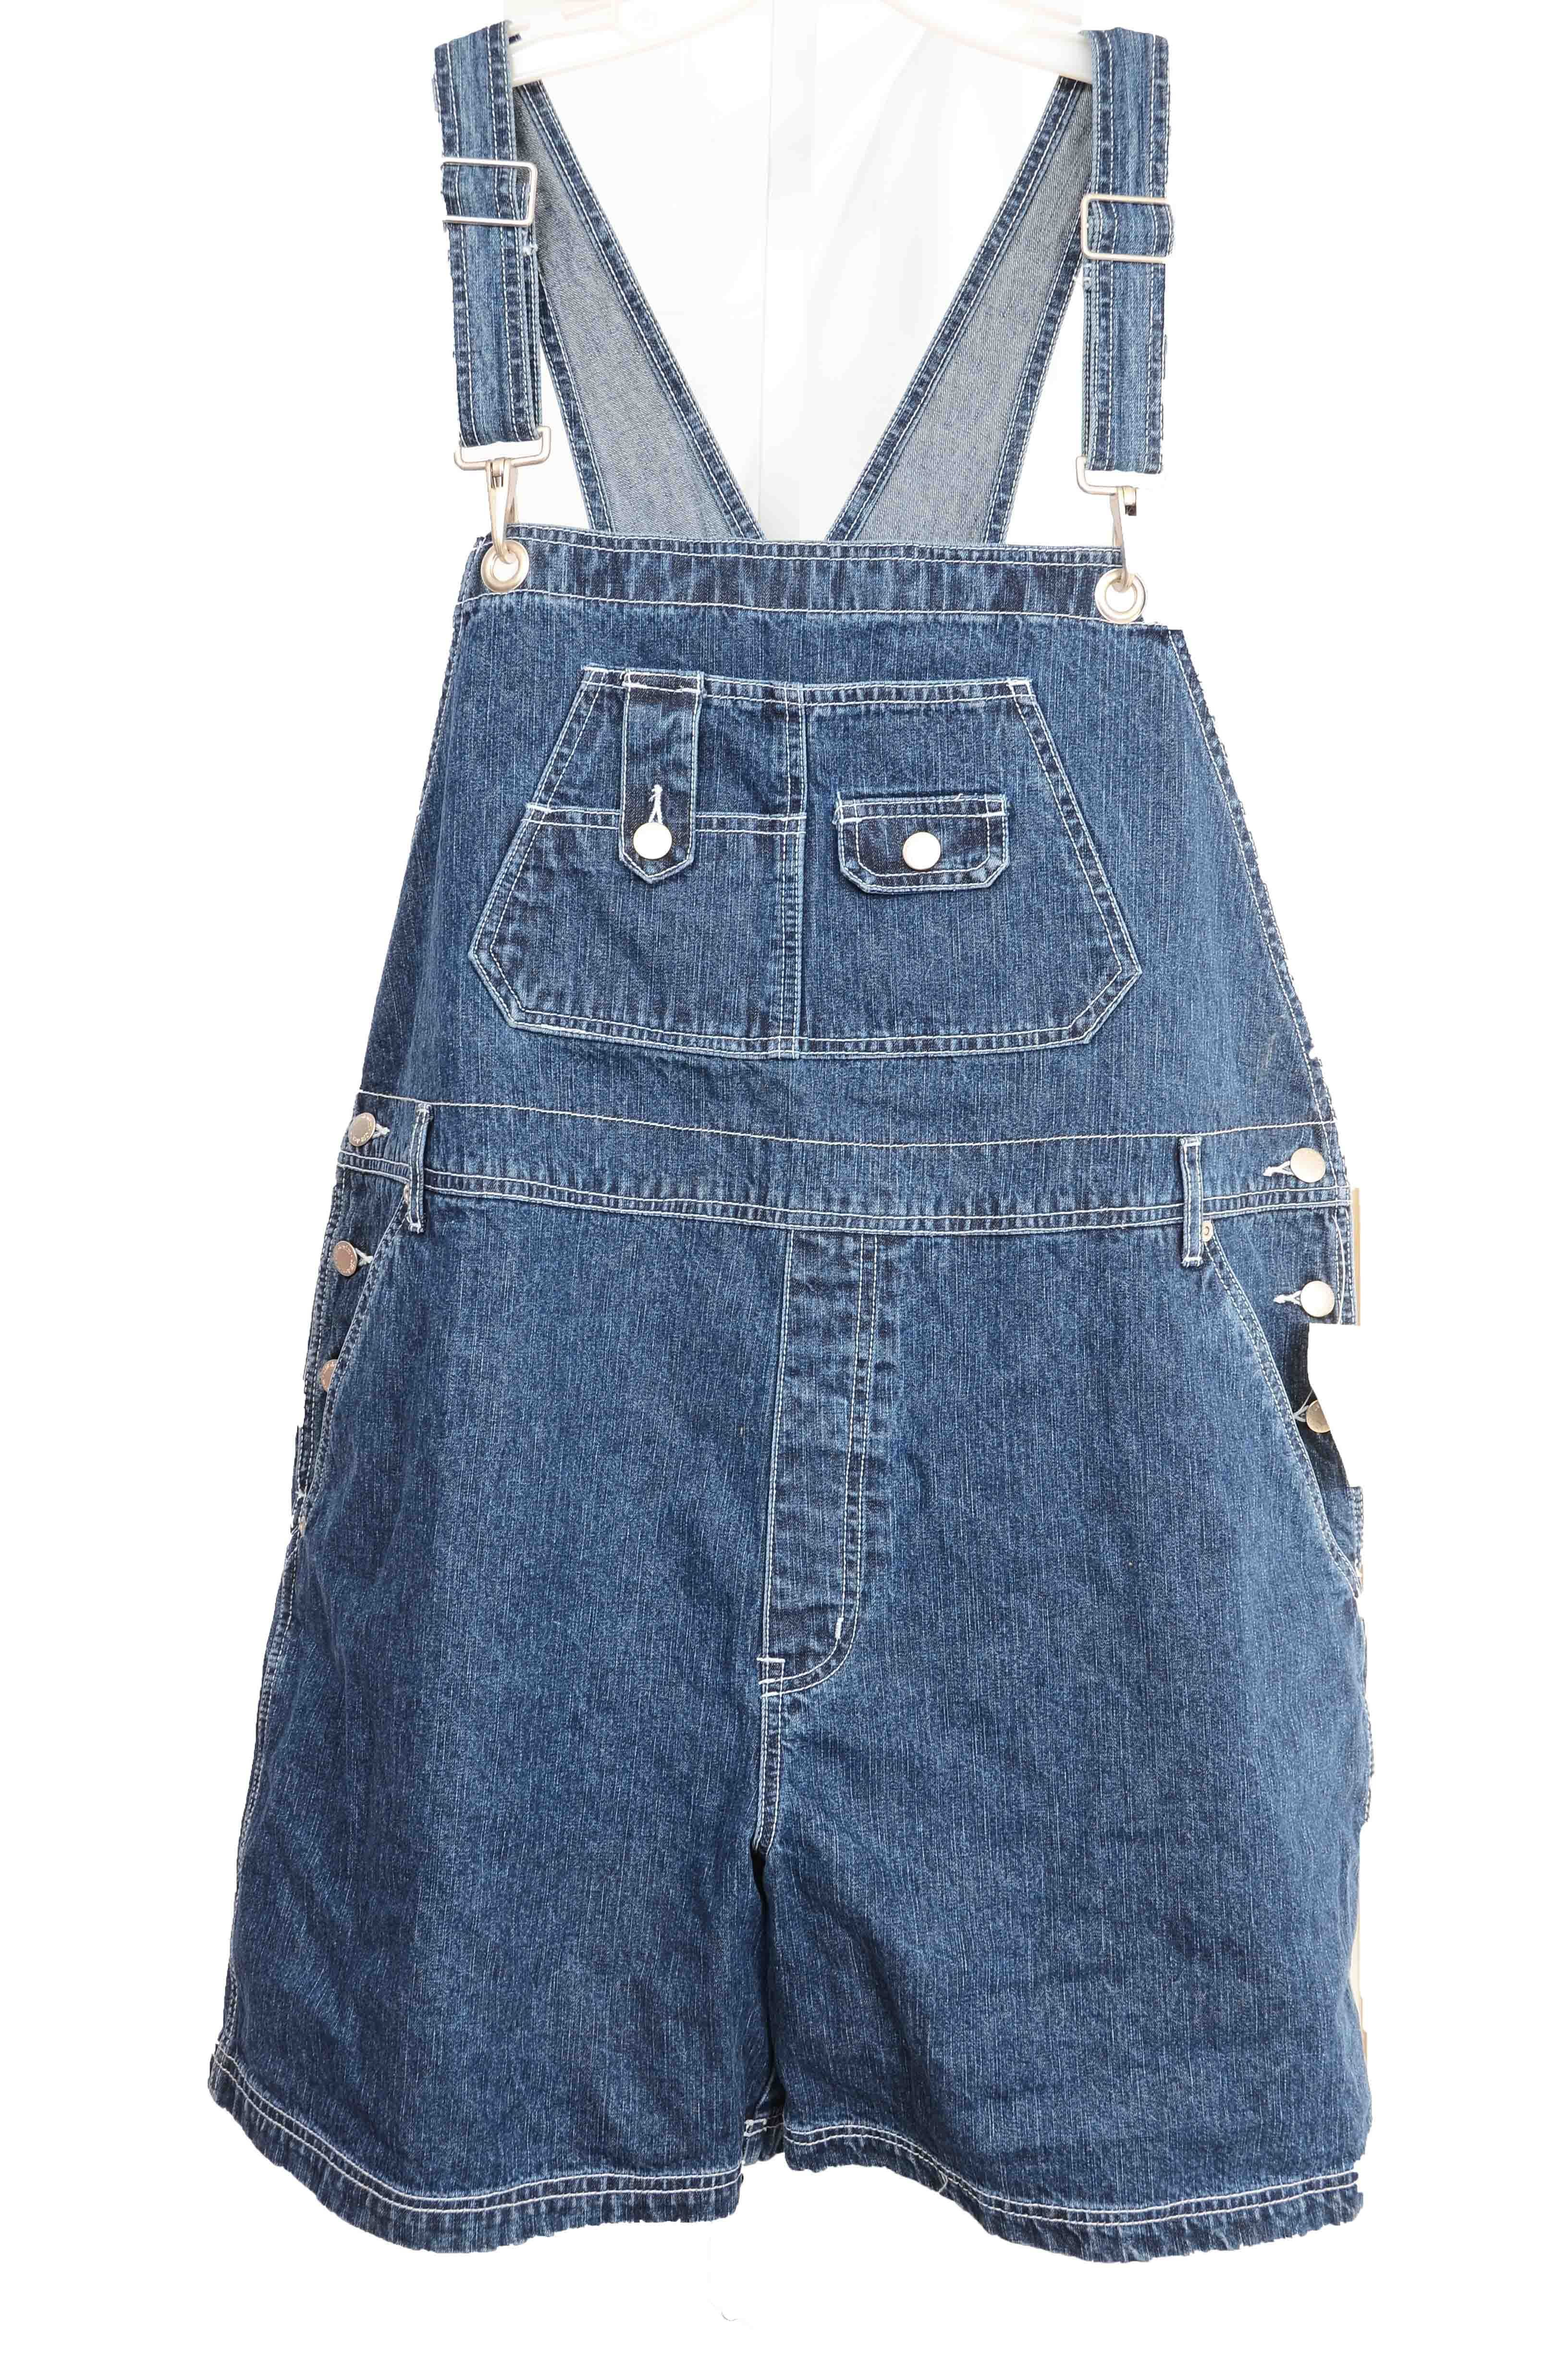 Fourever Funky - Plus Size Baggy Short Overalls Women's Classic Blue